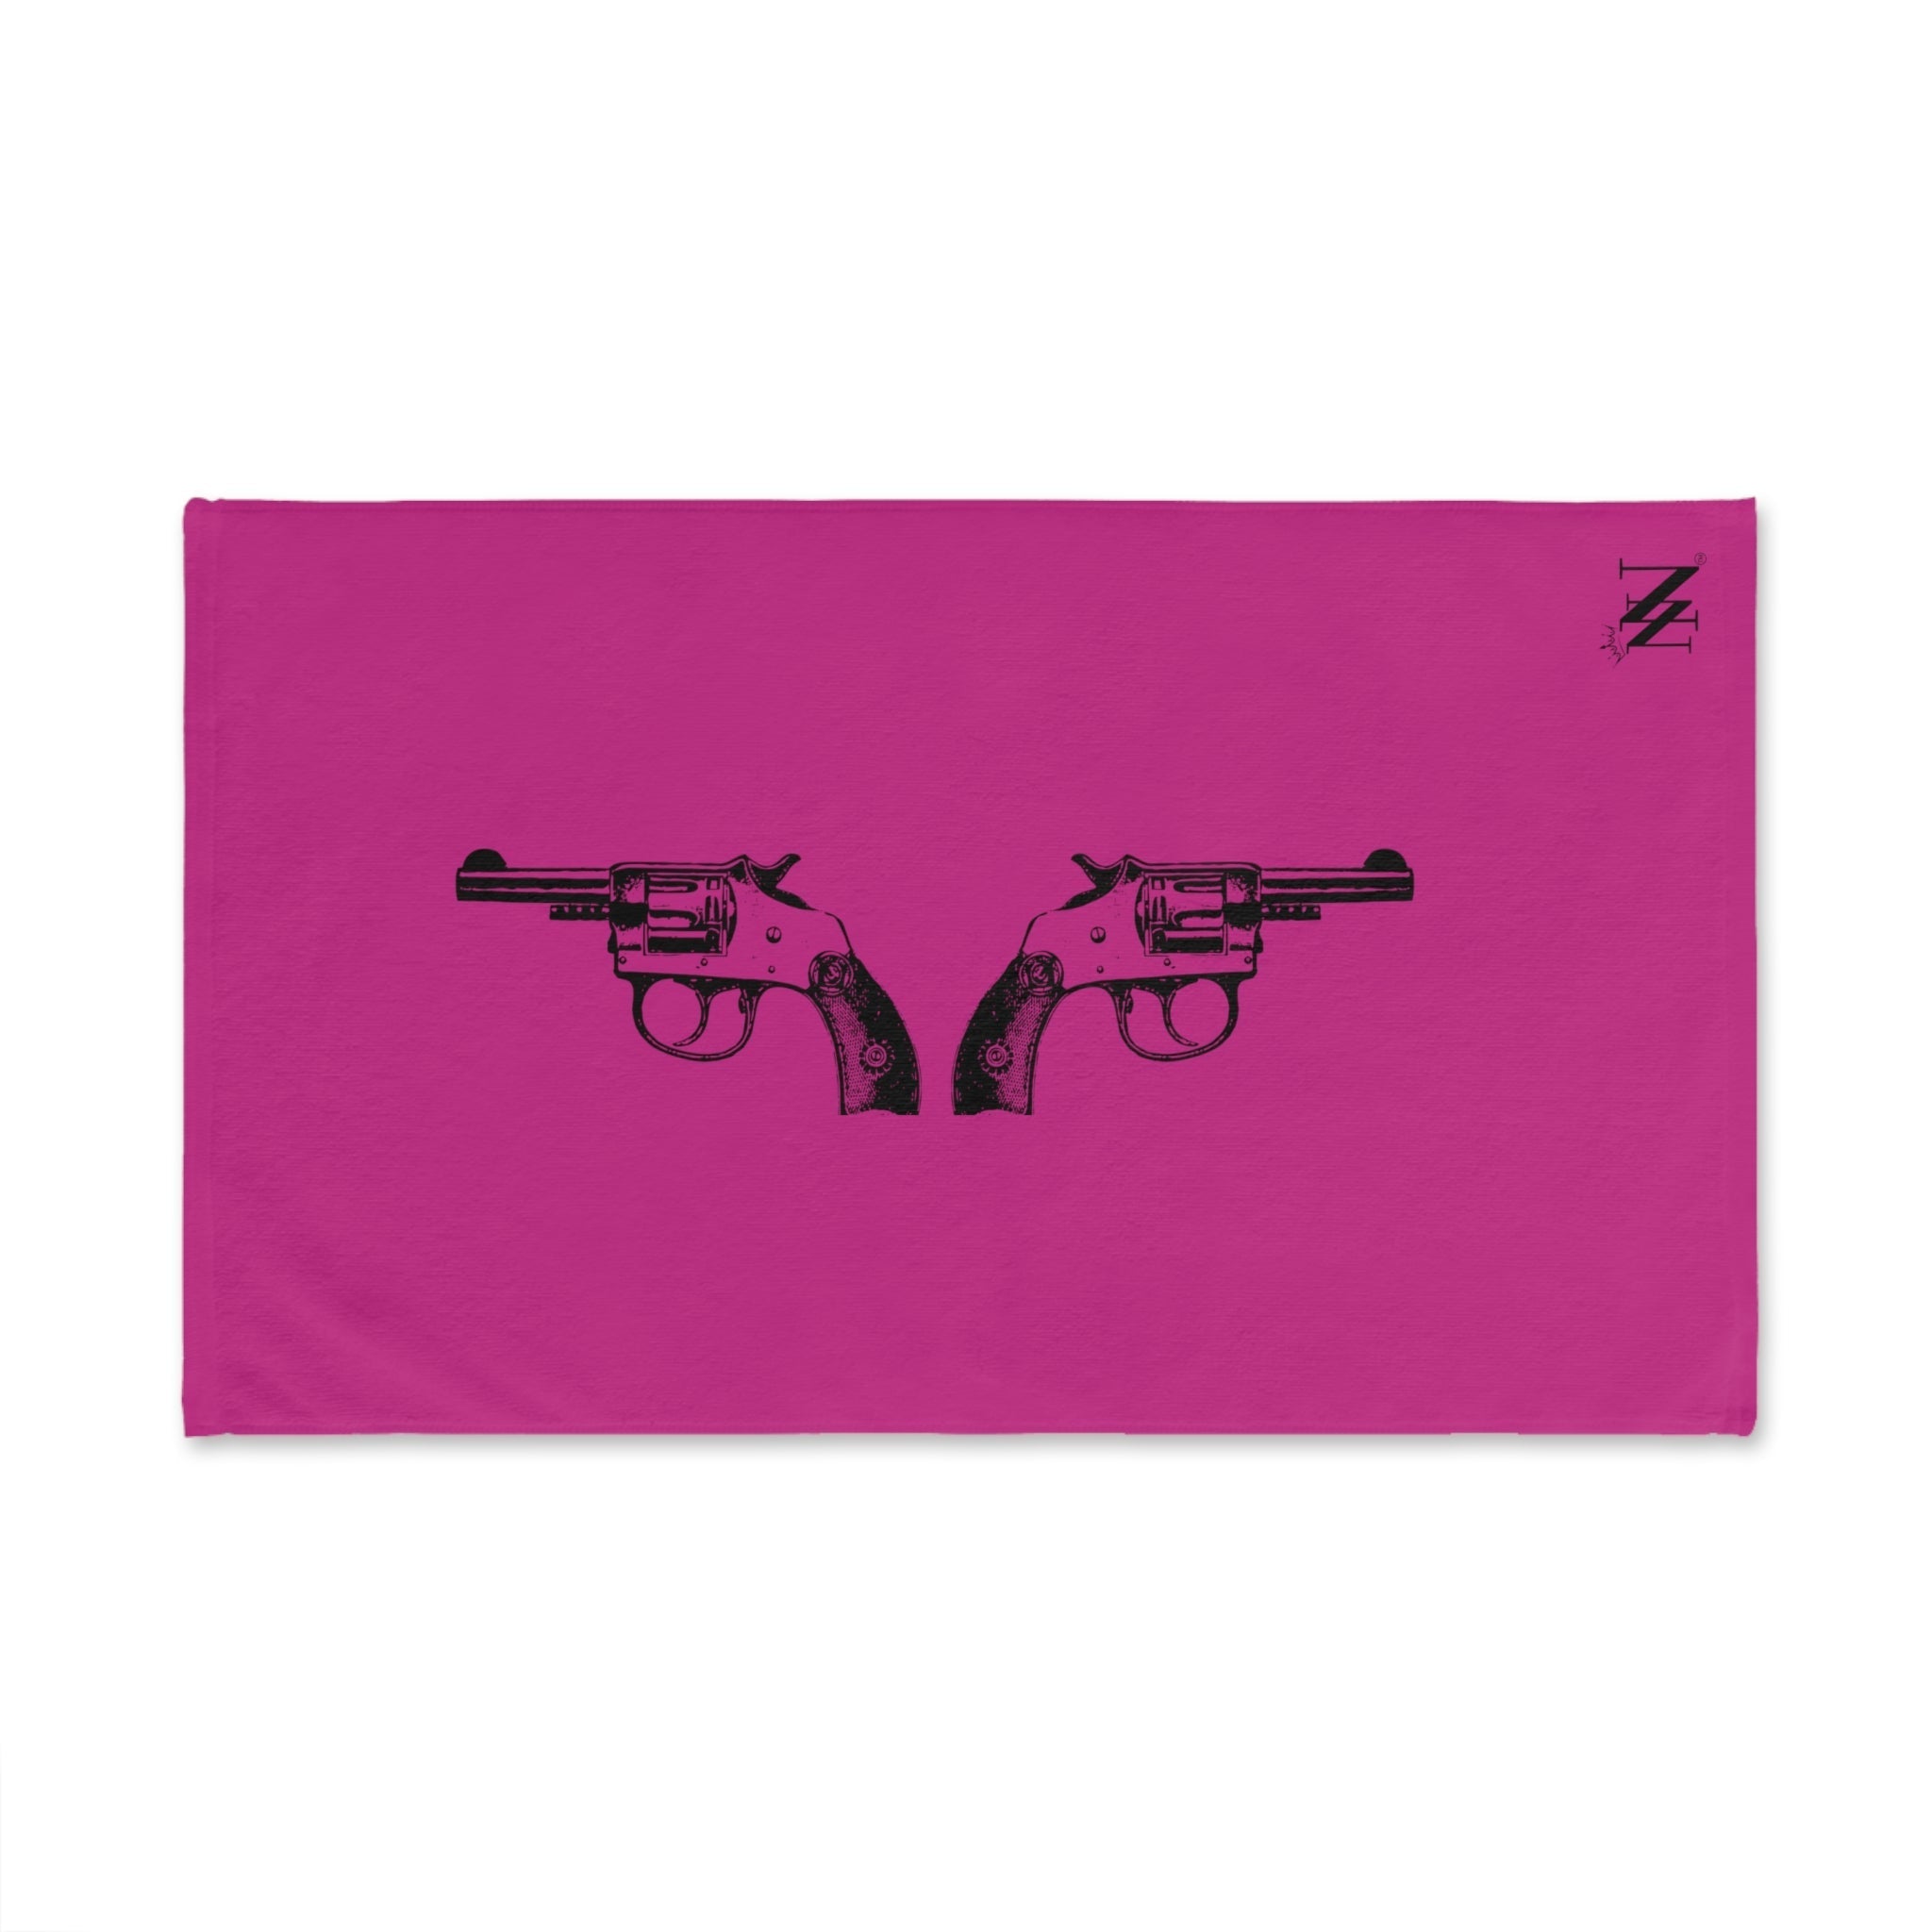 Black Revolver Gun Show Fuscia | Funny Gifts for Men - Gifts for Him - Birthday Gifts for Men, Him, Husband, Boyfriend, New Couple Gifts, Fathers & Valentines Day Gifts, Hand Towels NECTAR NAPKINS